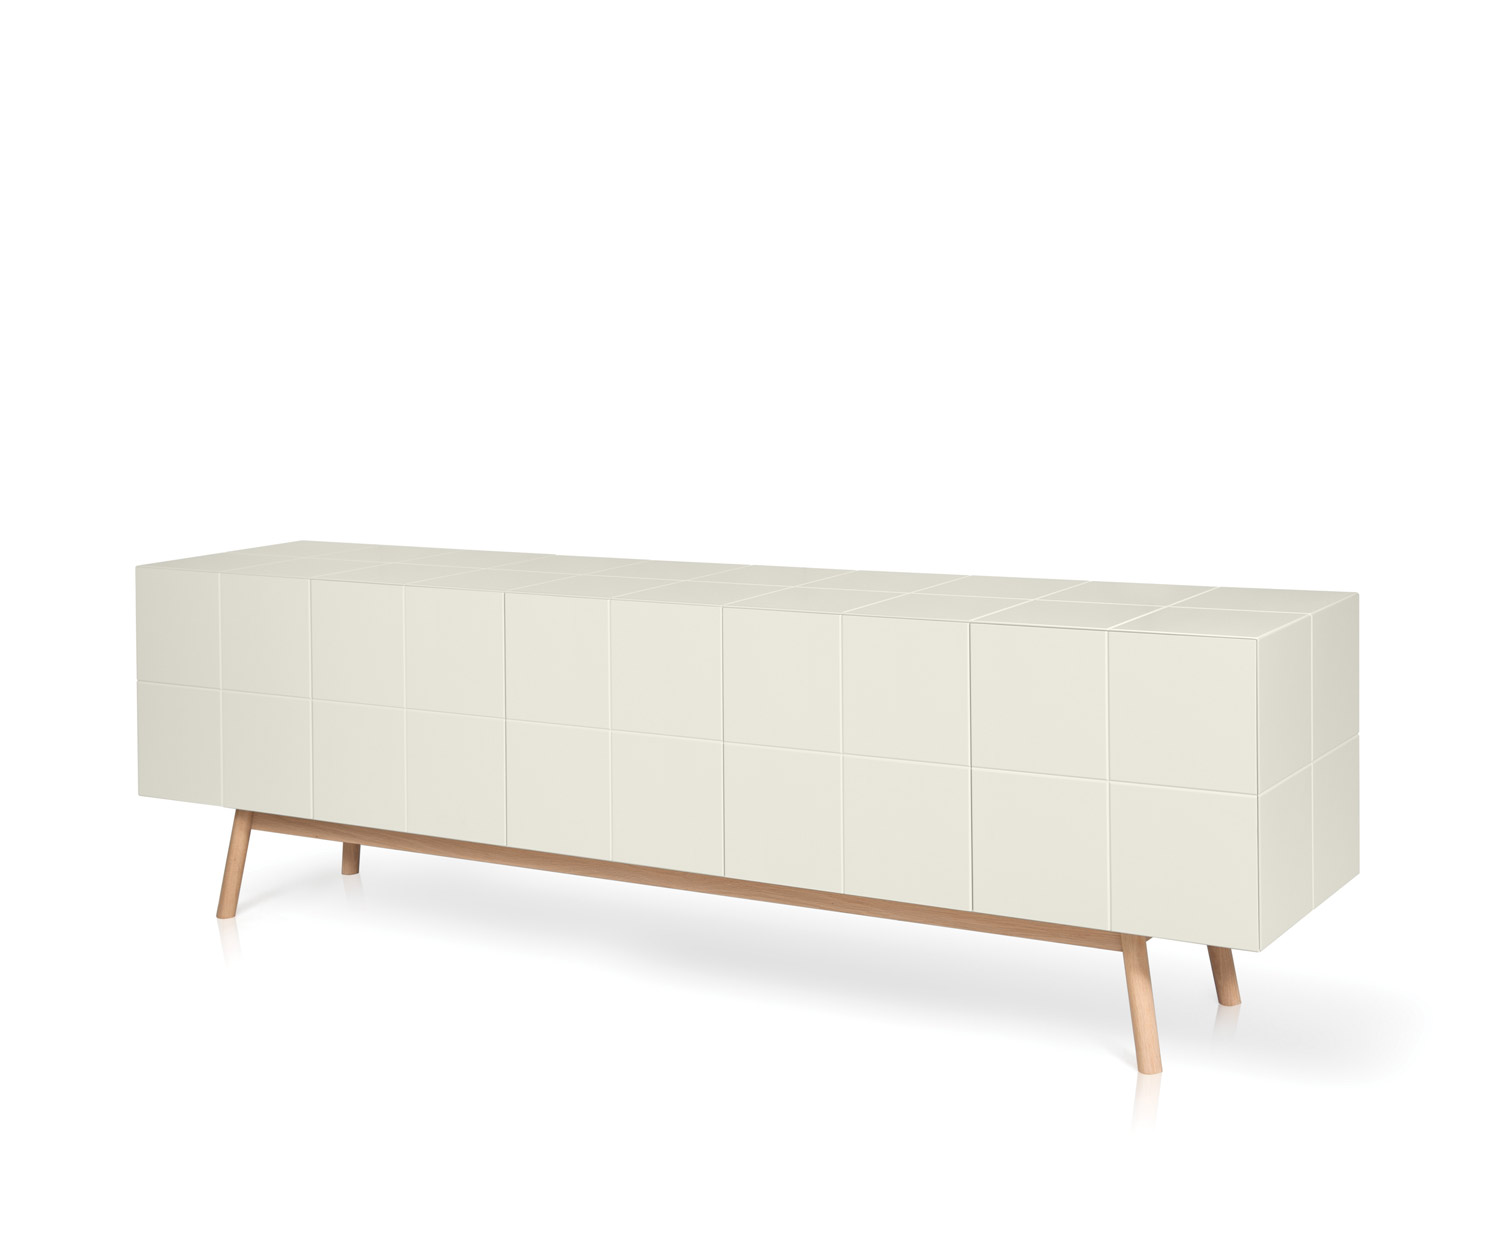 Exclusive al2 Design sideboard MOS I KO 003 B C5 in white with solid feet